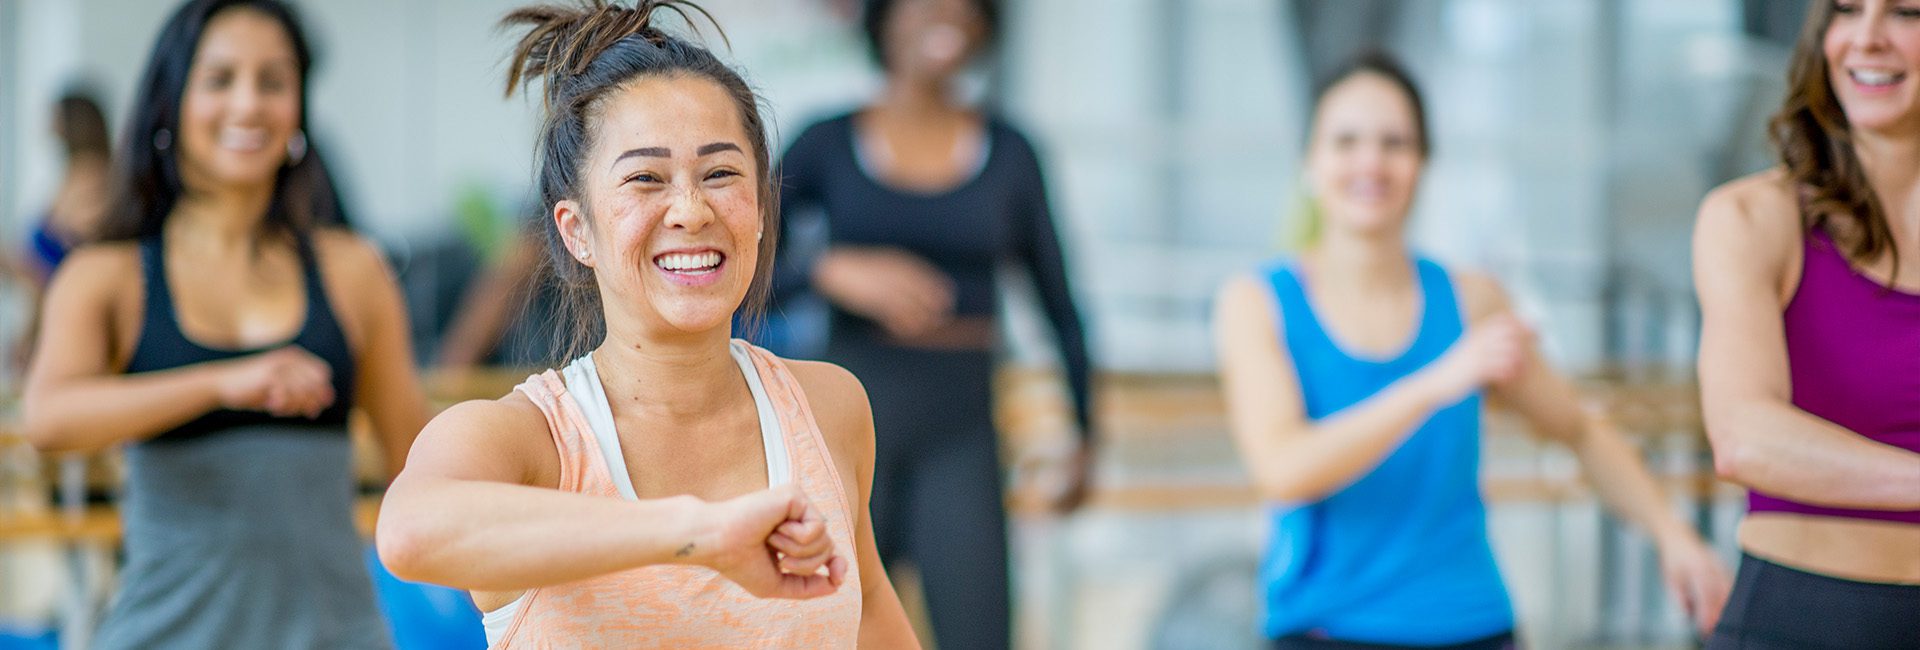 smiling in a zumba fitness gym class